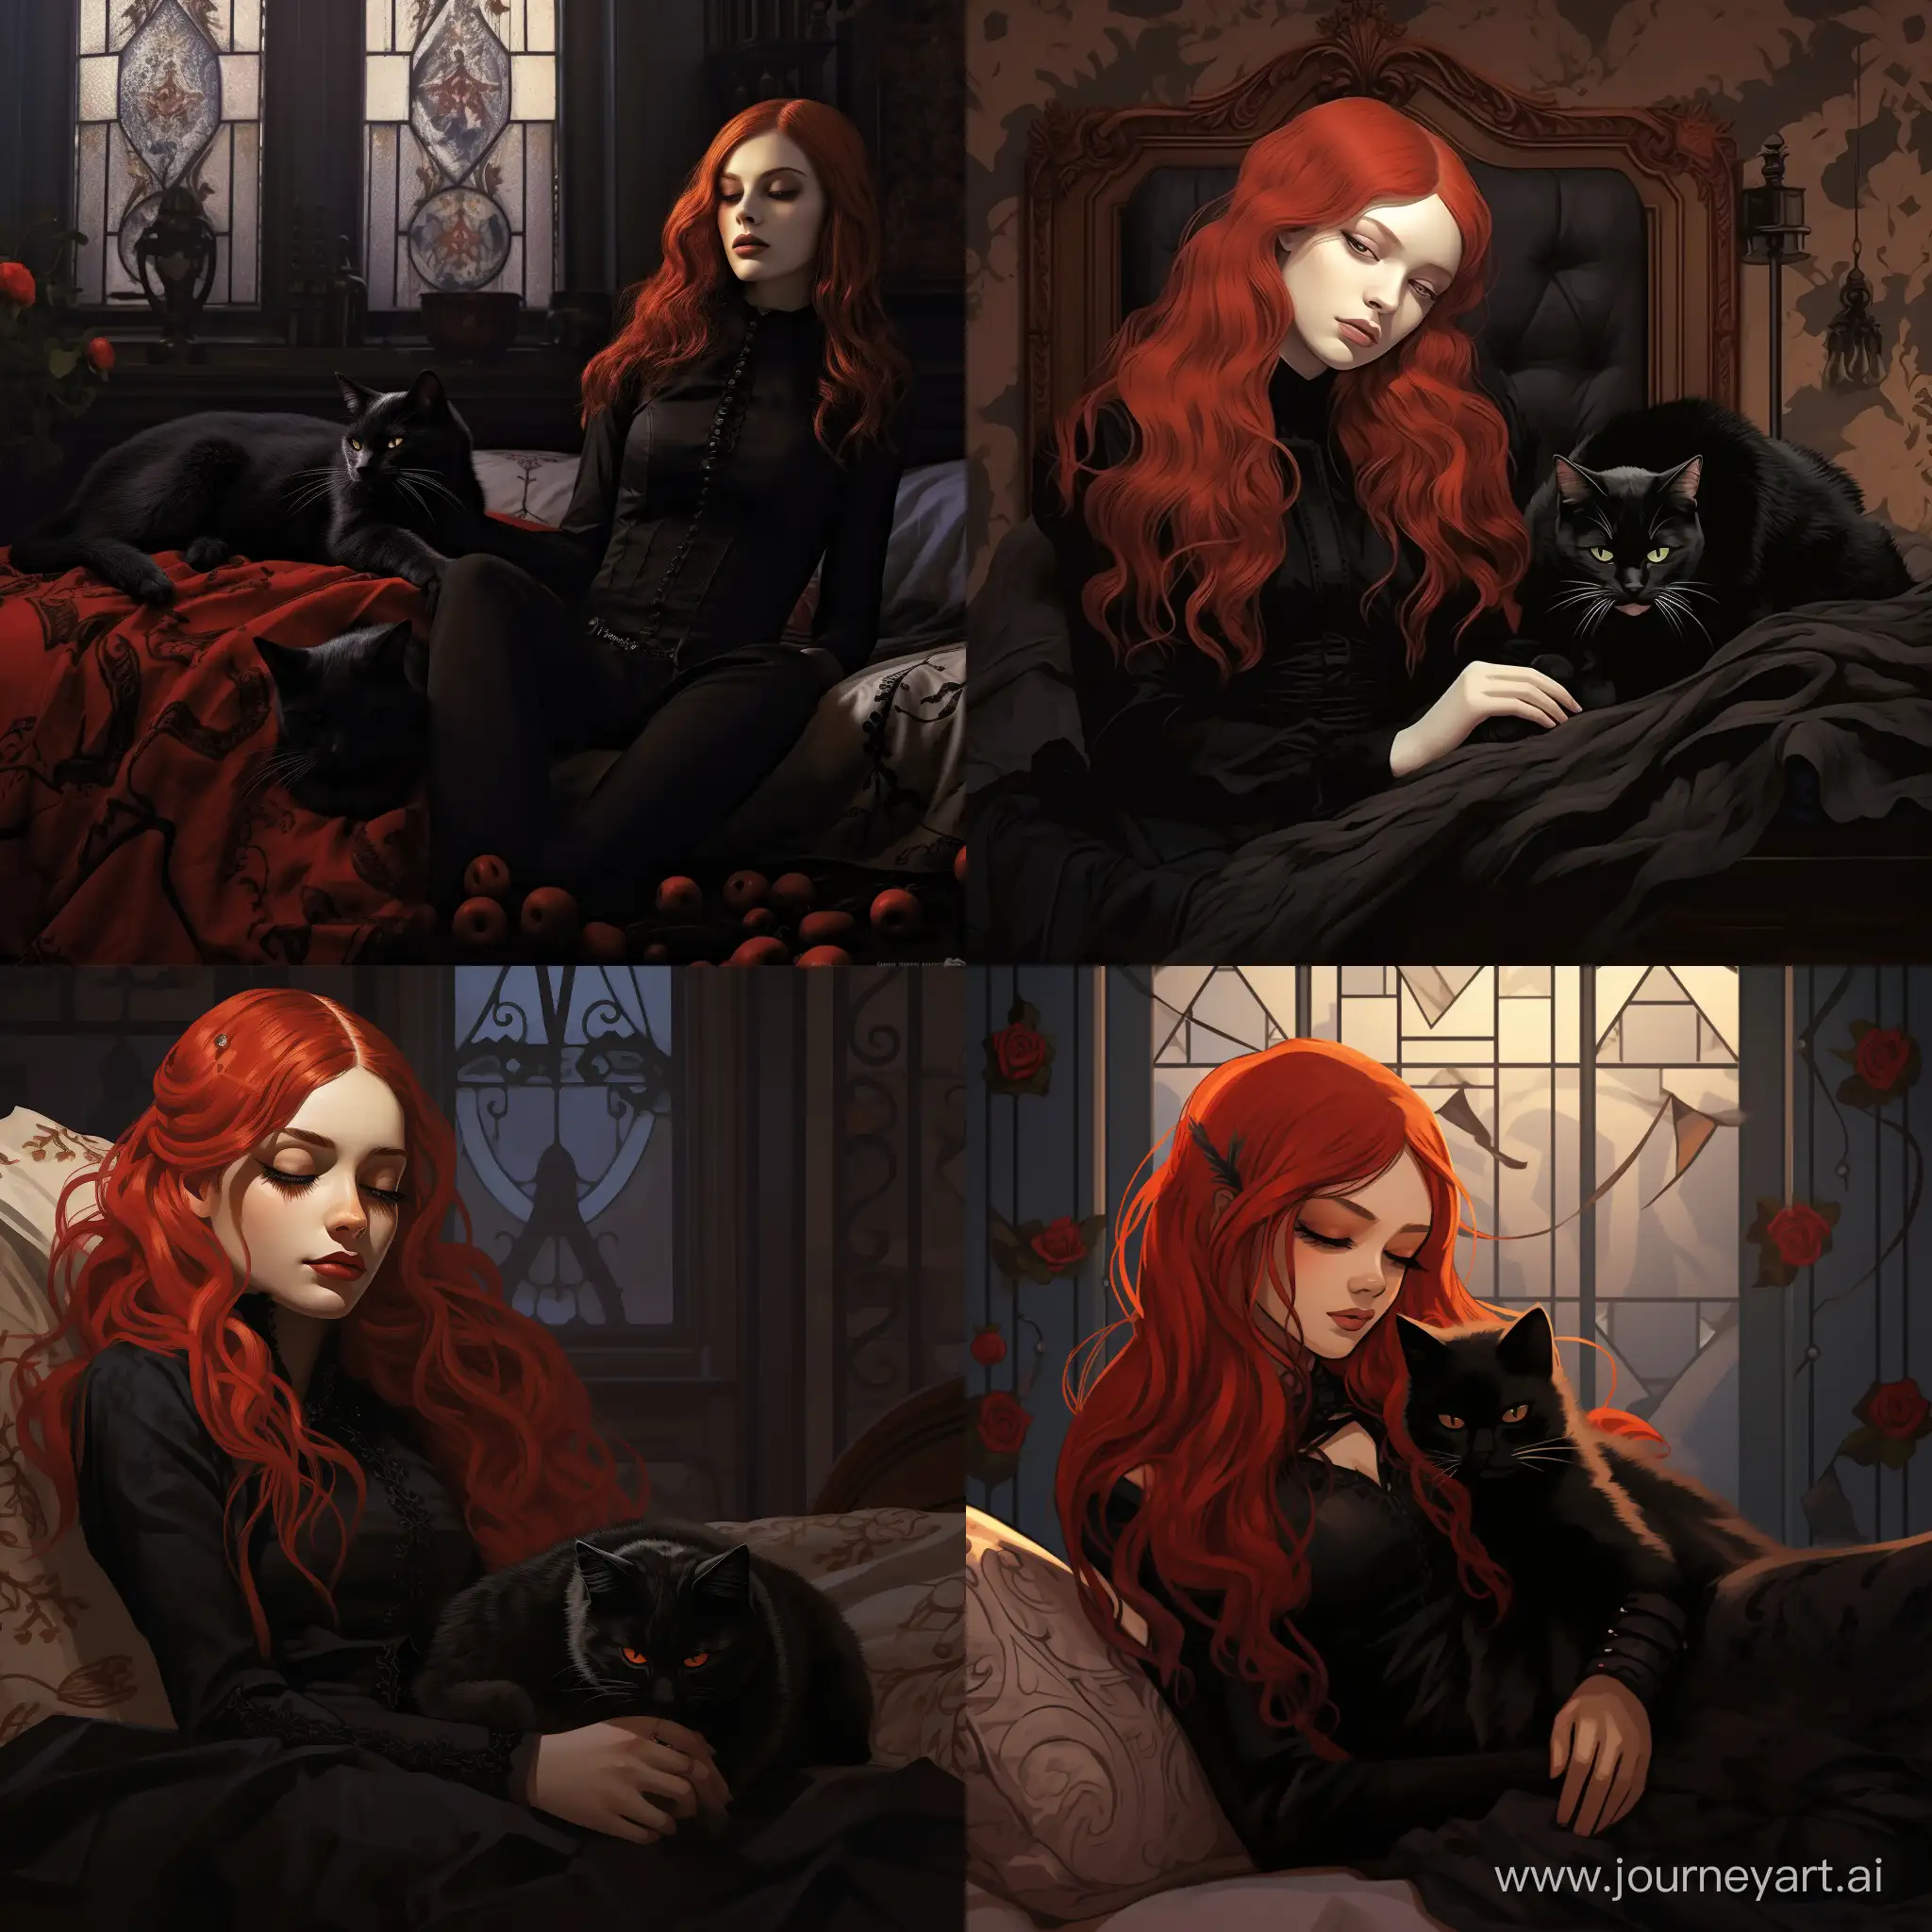 Enchanting-Slumber-RedHaired-Gothic-Girl-and-Stylish-Cat-in-Cozy-Embrace